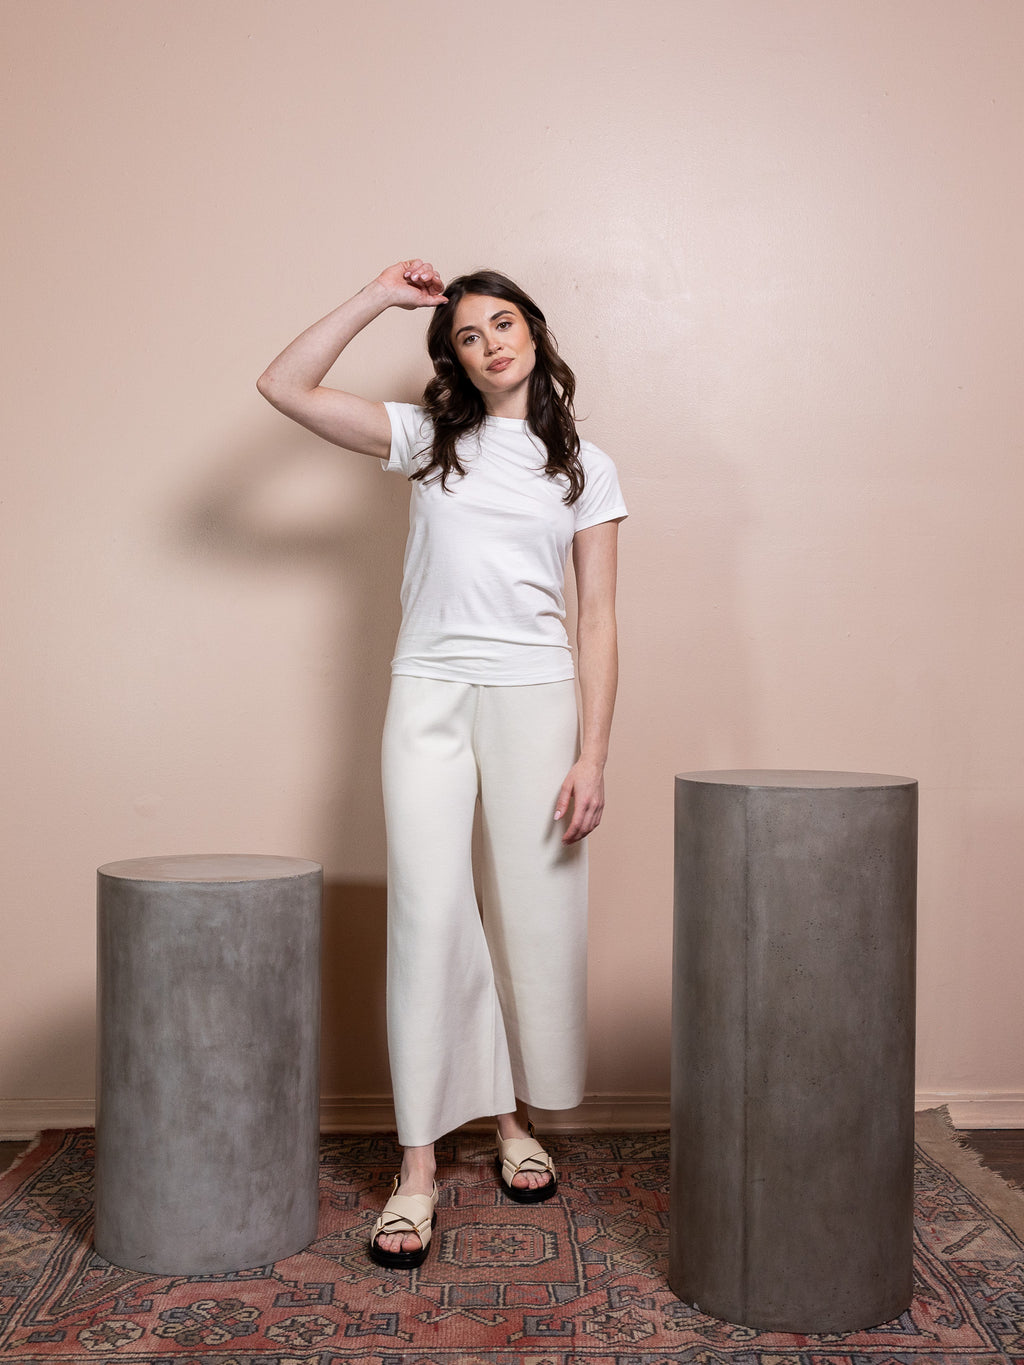 Woman in white t-shirt and white pants against pink background